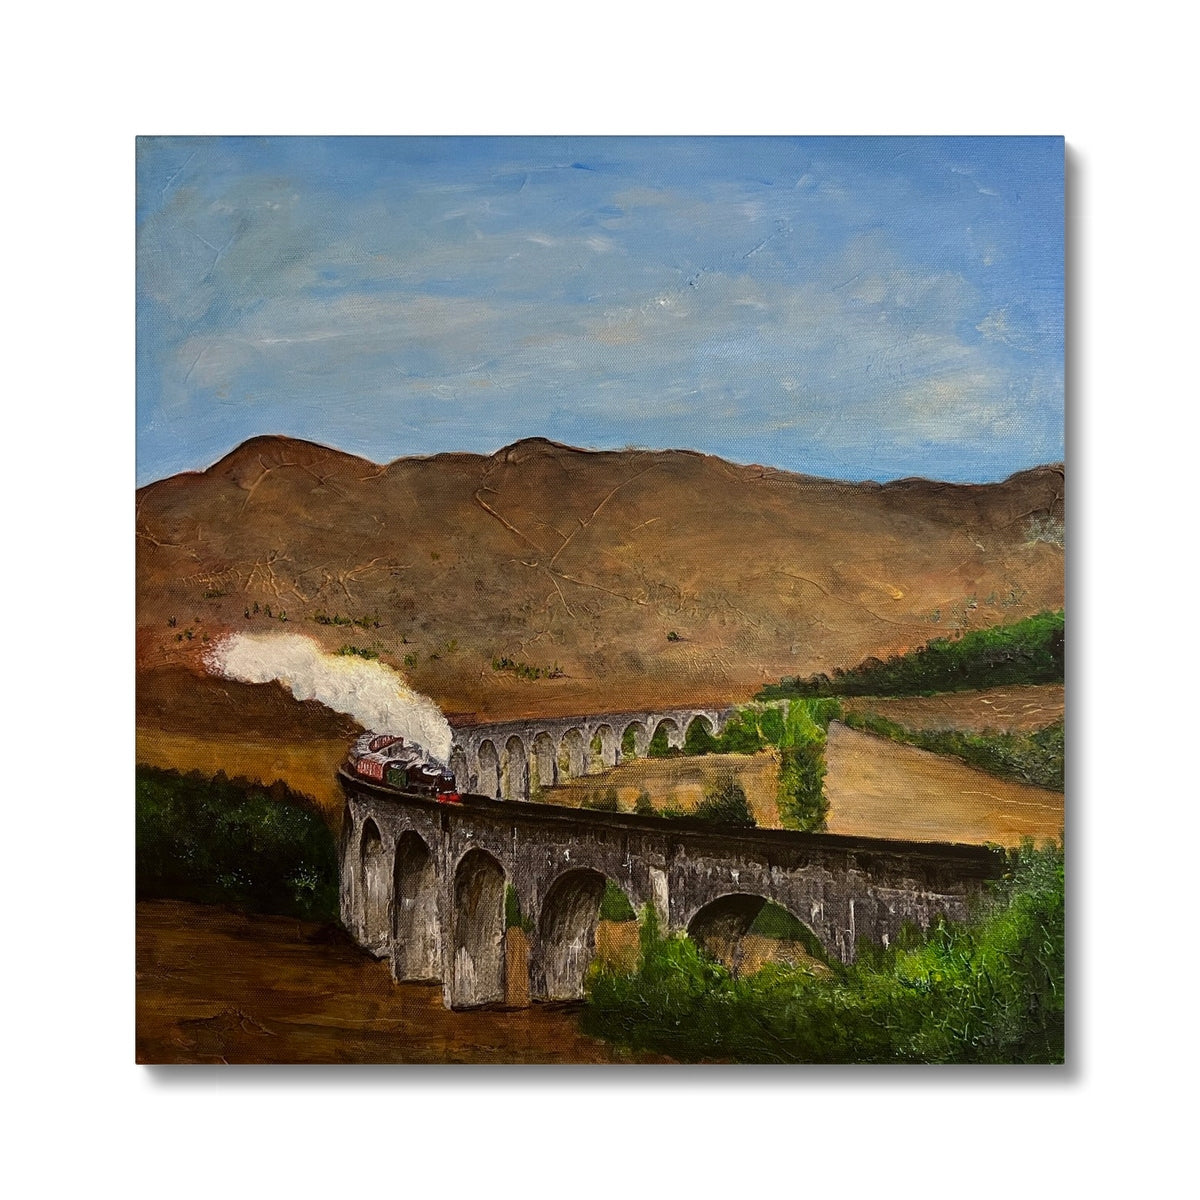 Glenfinnan Viaduct Painting | Canvas From Scotland-Contemporary Stretched Canvas Prints-Scottish Highlands & Lowlands Art Gallery-24"x24"-Paintings, Prints, Homeware, Art Gifts From Scotland By Scottish Artist Kevin Hunter